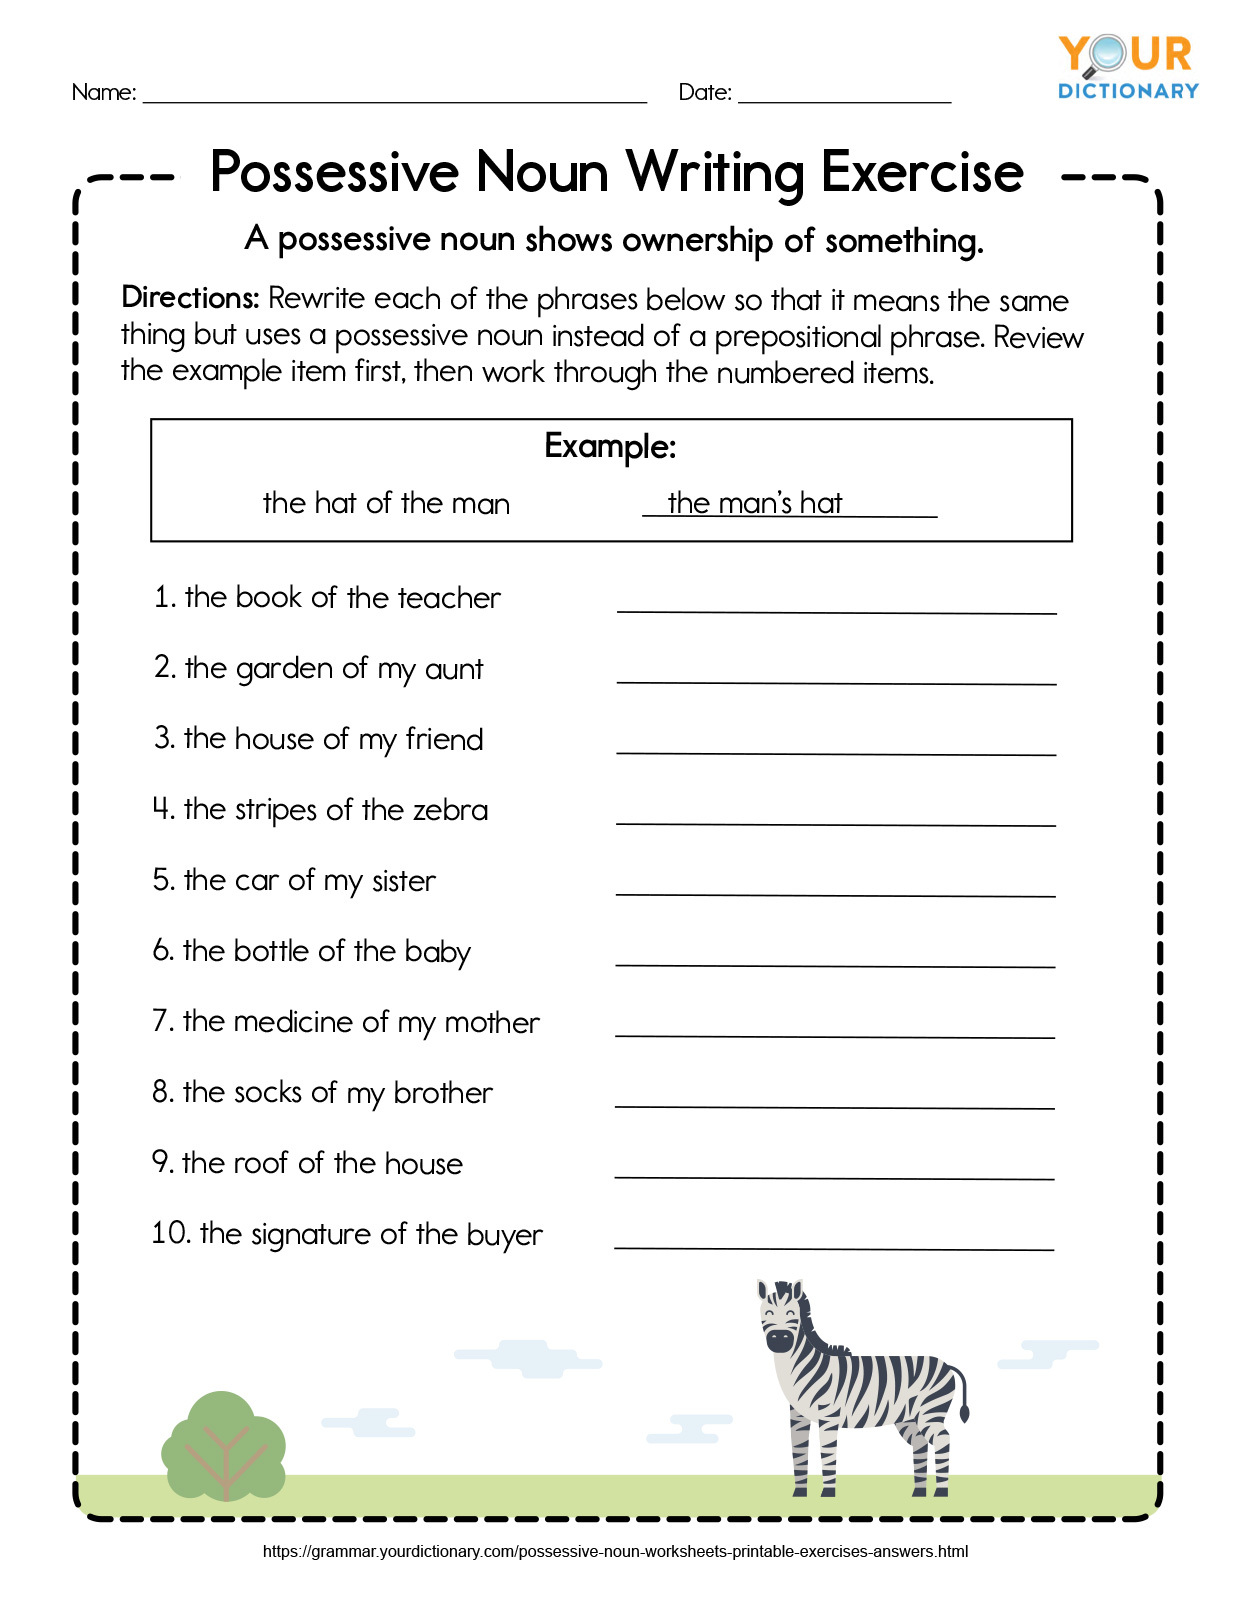 Possessive Noun Worksheets Printable Exercises With Answers SexiezPicz Web Porn